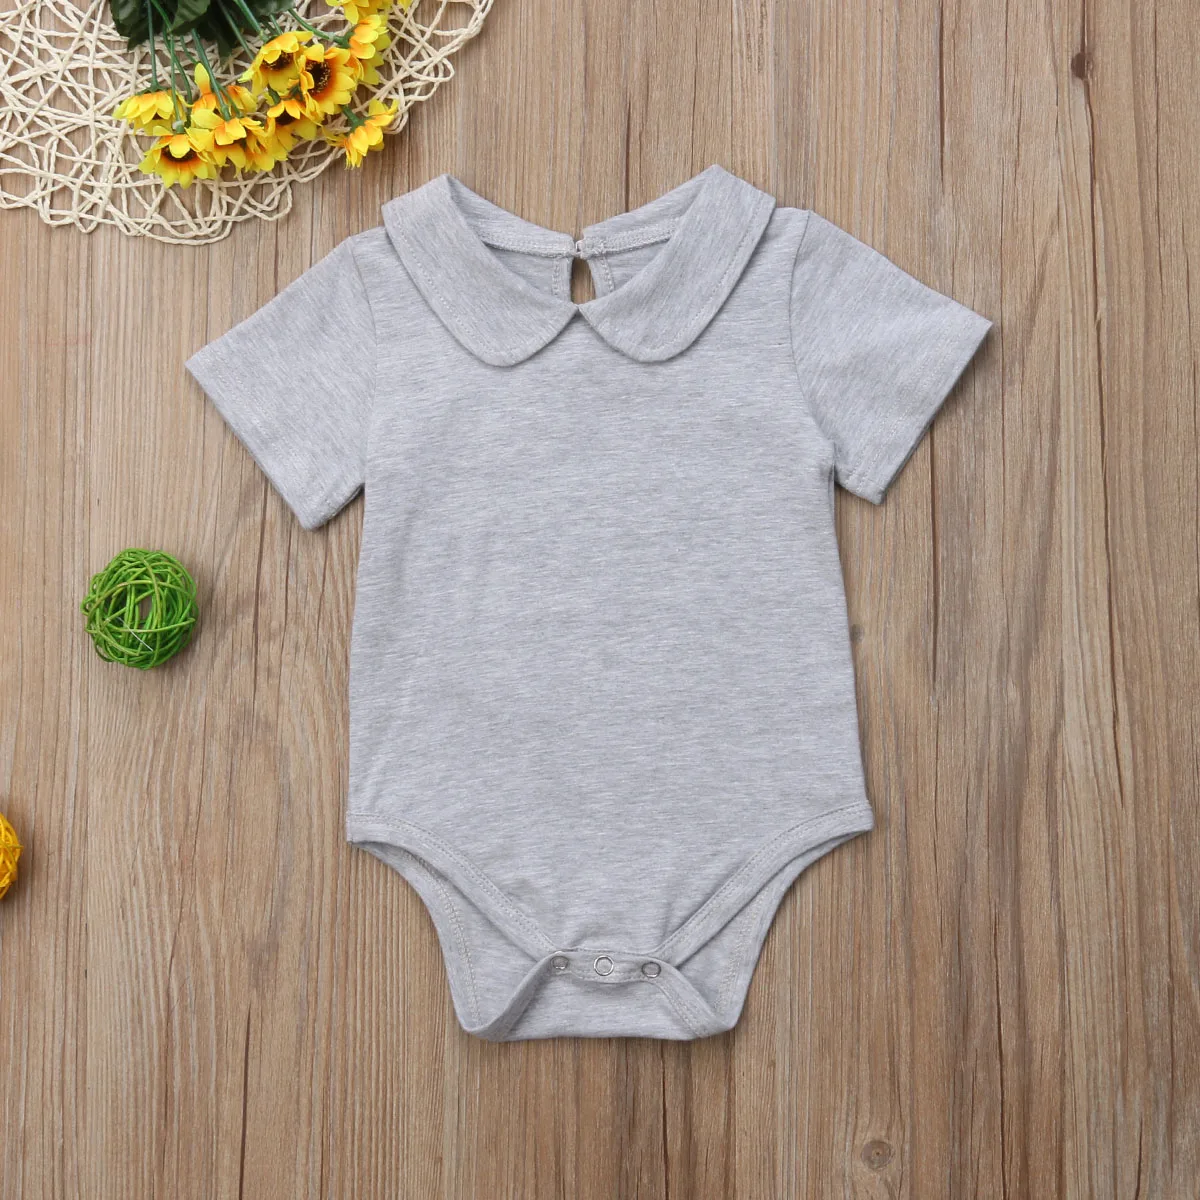 Brand New Newborn Infant Baby Girls Boys Casual Bodysuit Short Sleeve Peter Pan Collar Solid Cotton Jumpsuits Playsuit 0-1Y